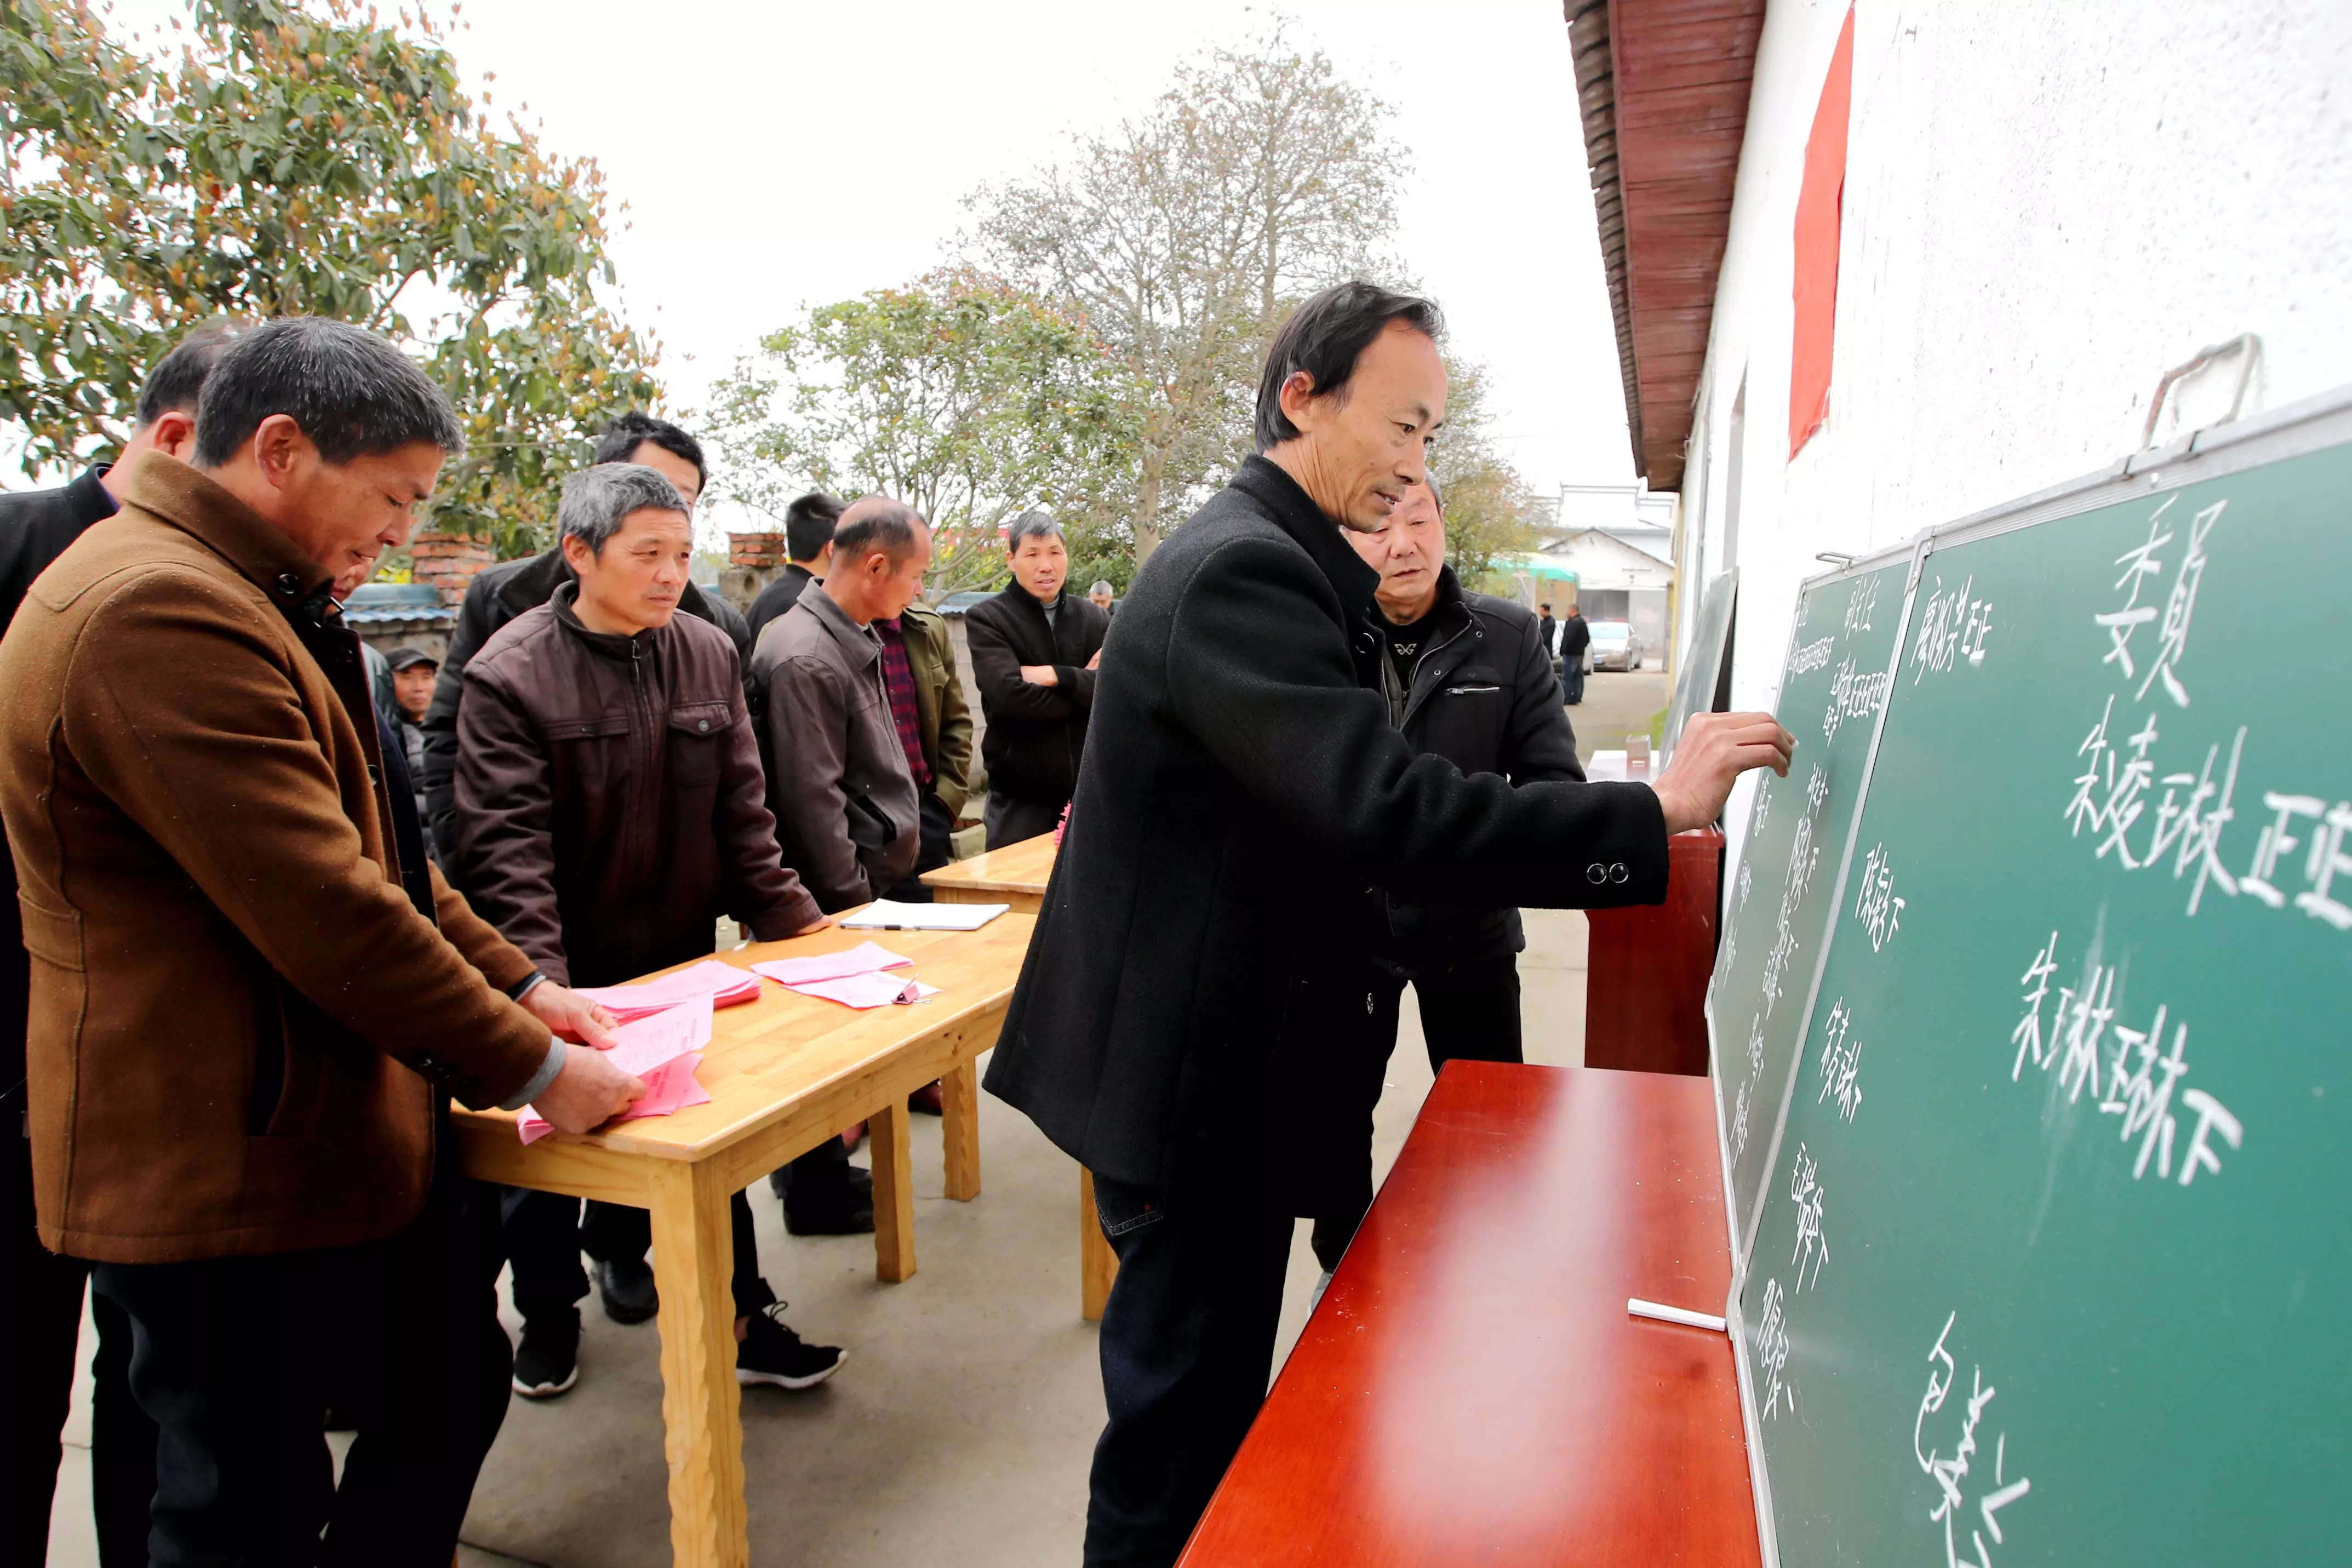 Workers count ballots during a village committee election at Geping village on March 4, 2021 in Xiajiang County, Jiangxi Province of China.